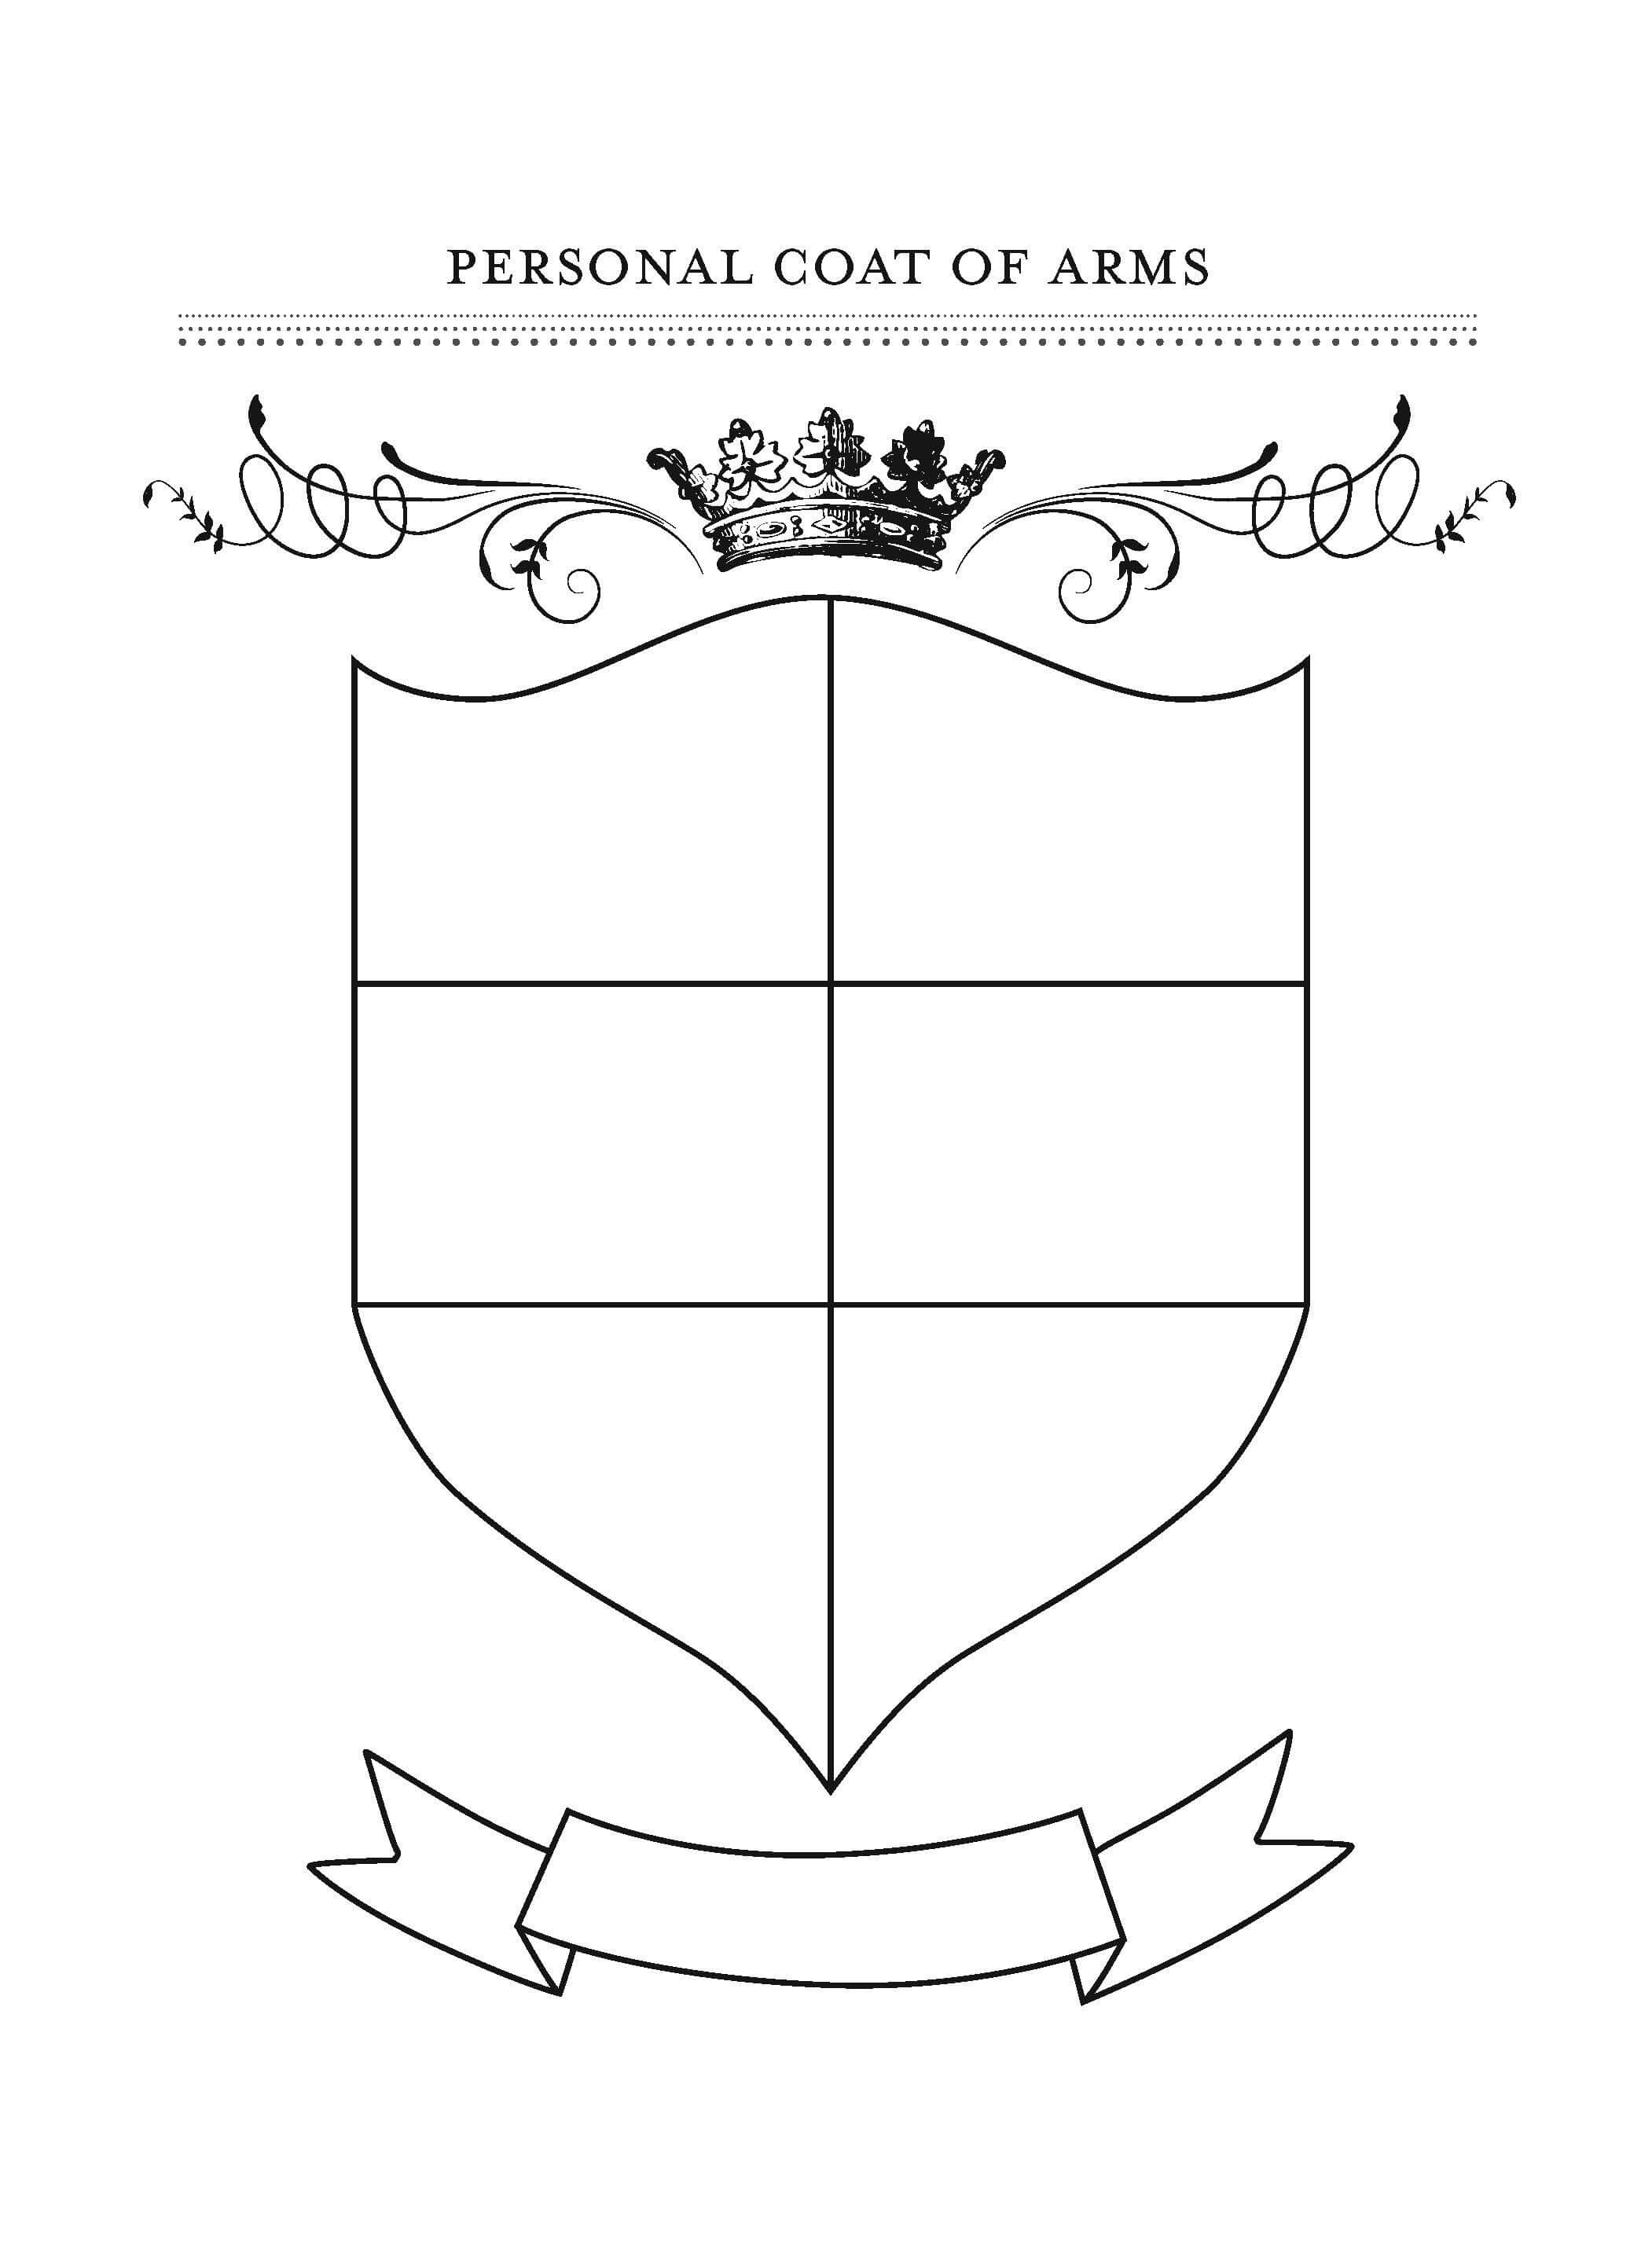 Honor Your Family With Fun Gratitude Crafts | Coat Of Arms For Blank Shield Template Printable